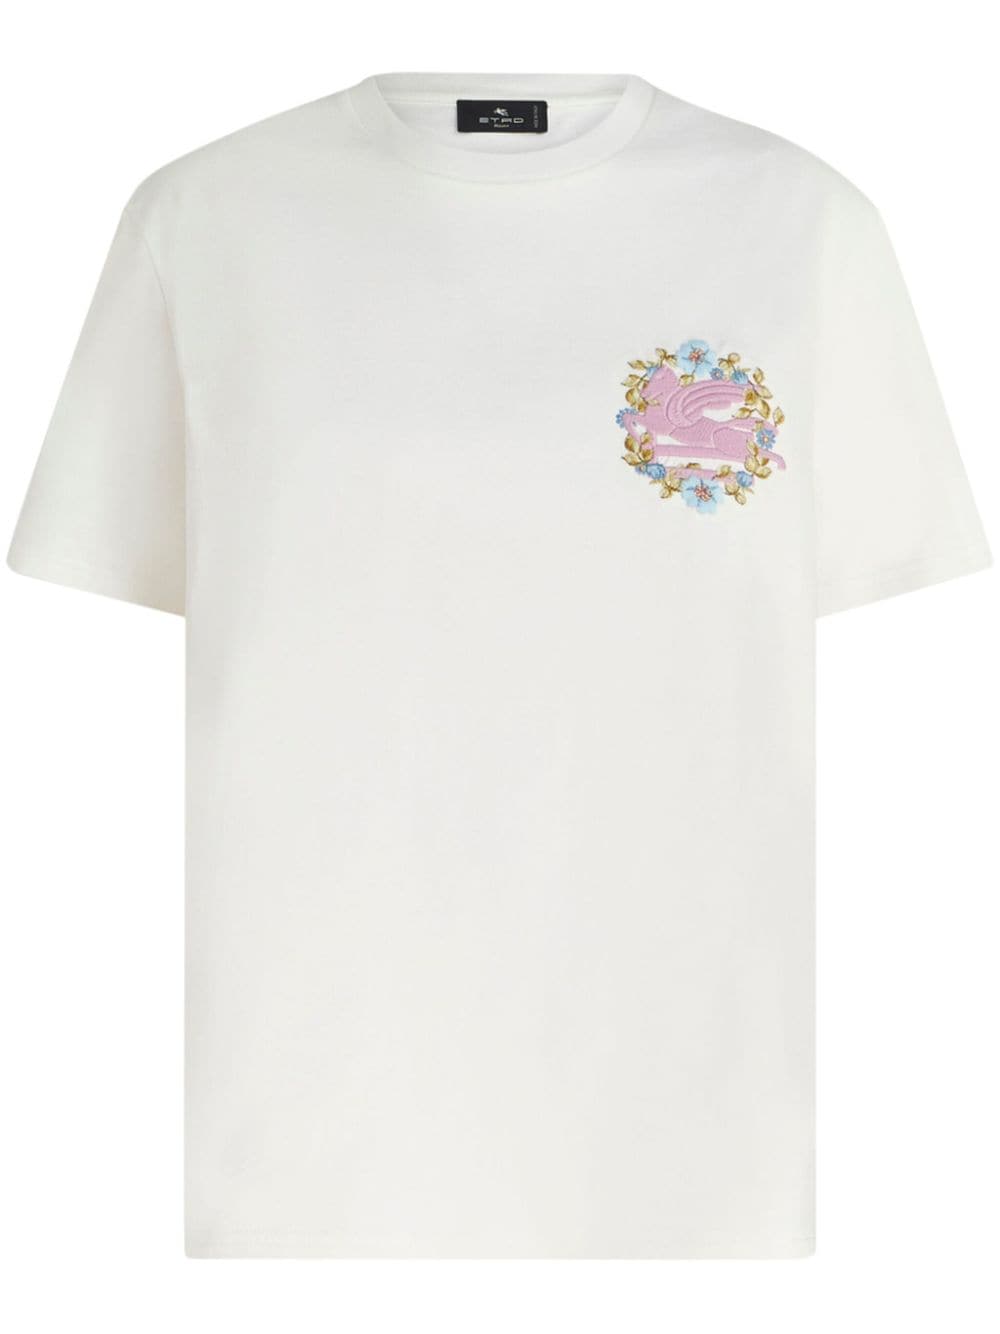 Pegaso-embroidered cotton T-shirt<BR/><BR/><BR/>